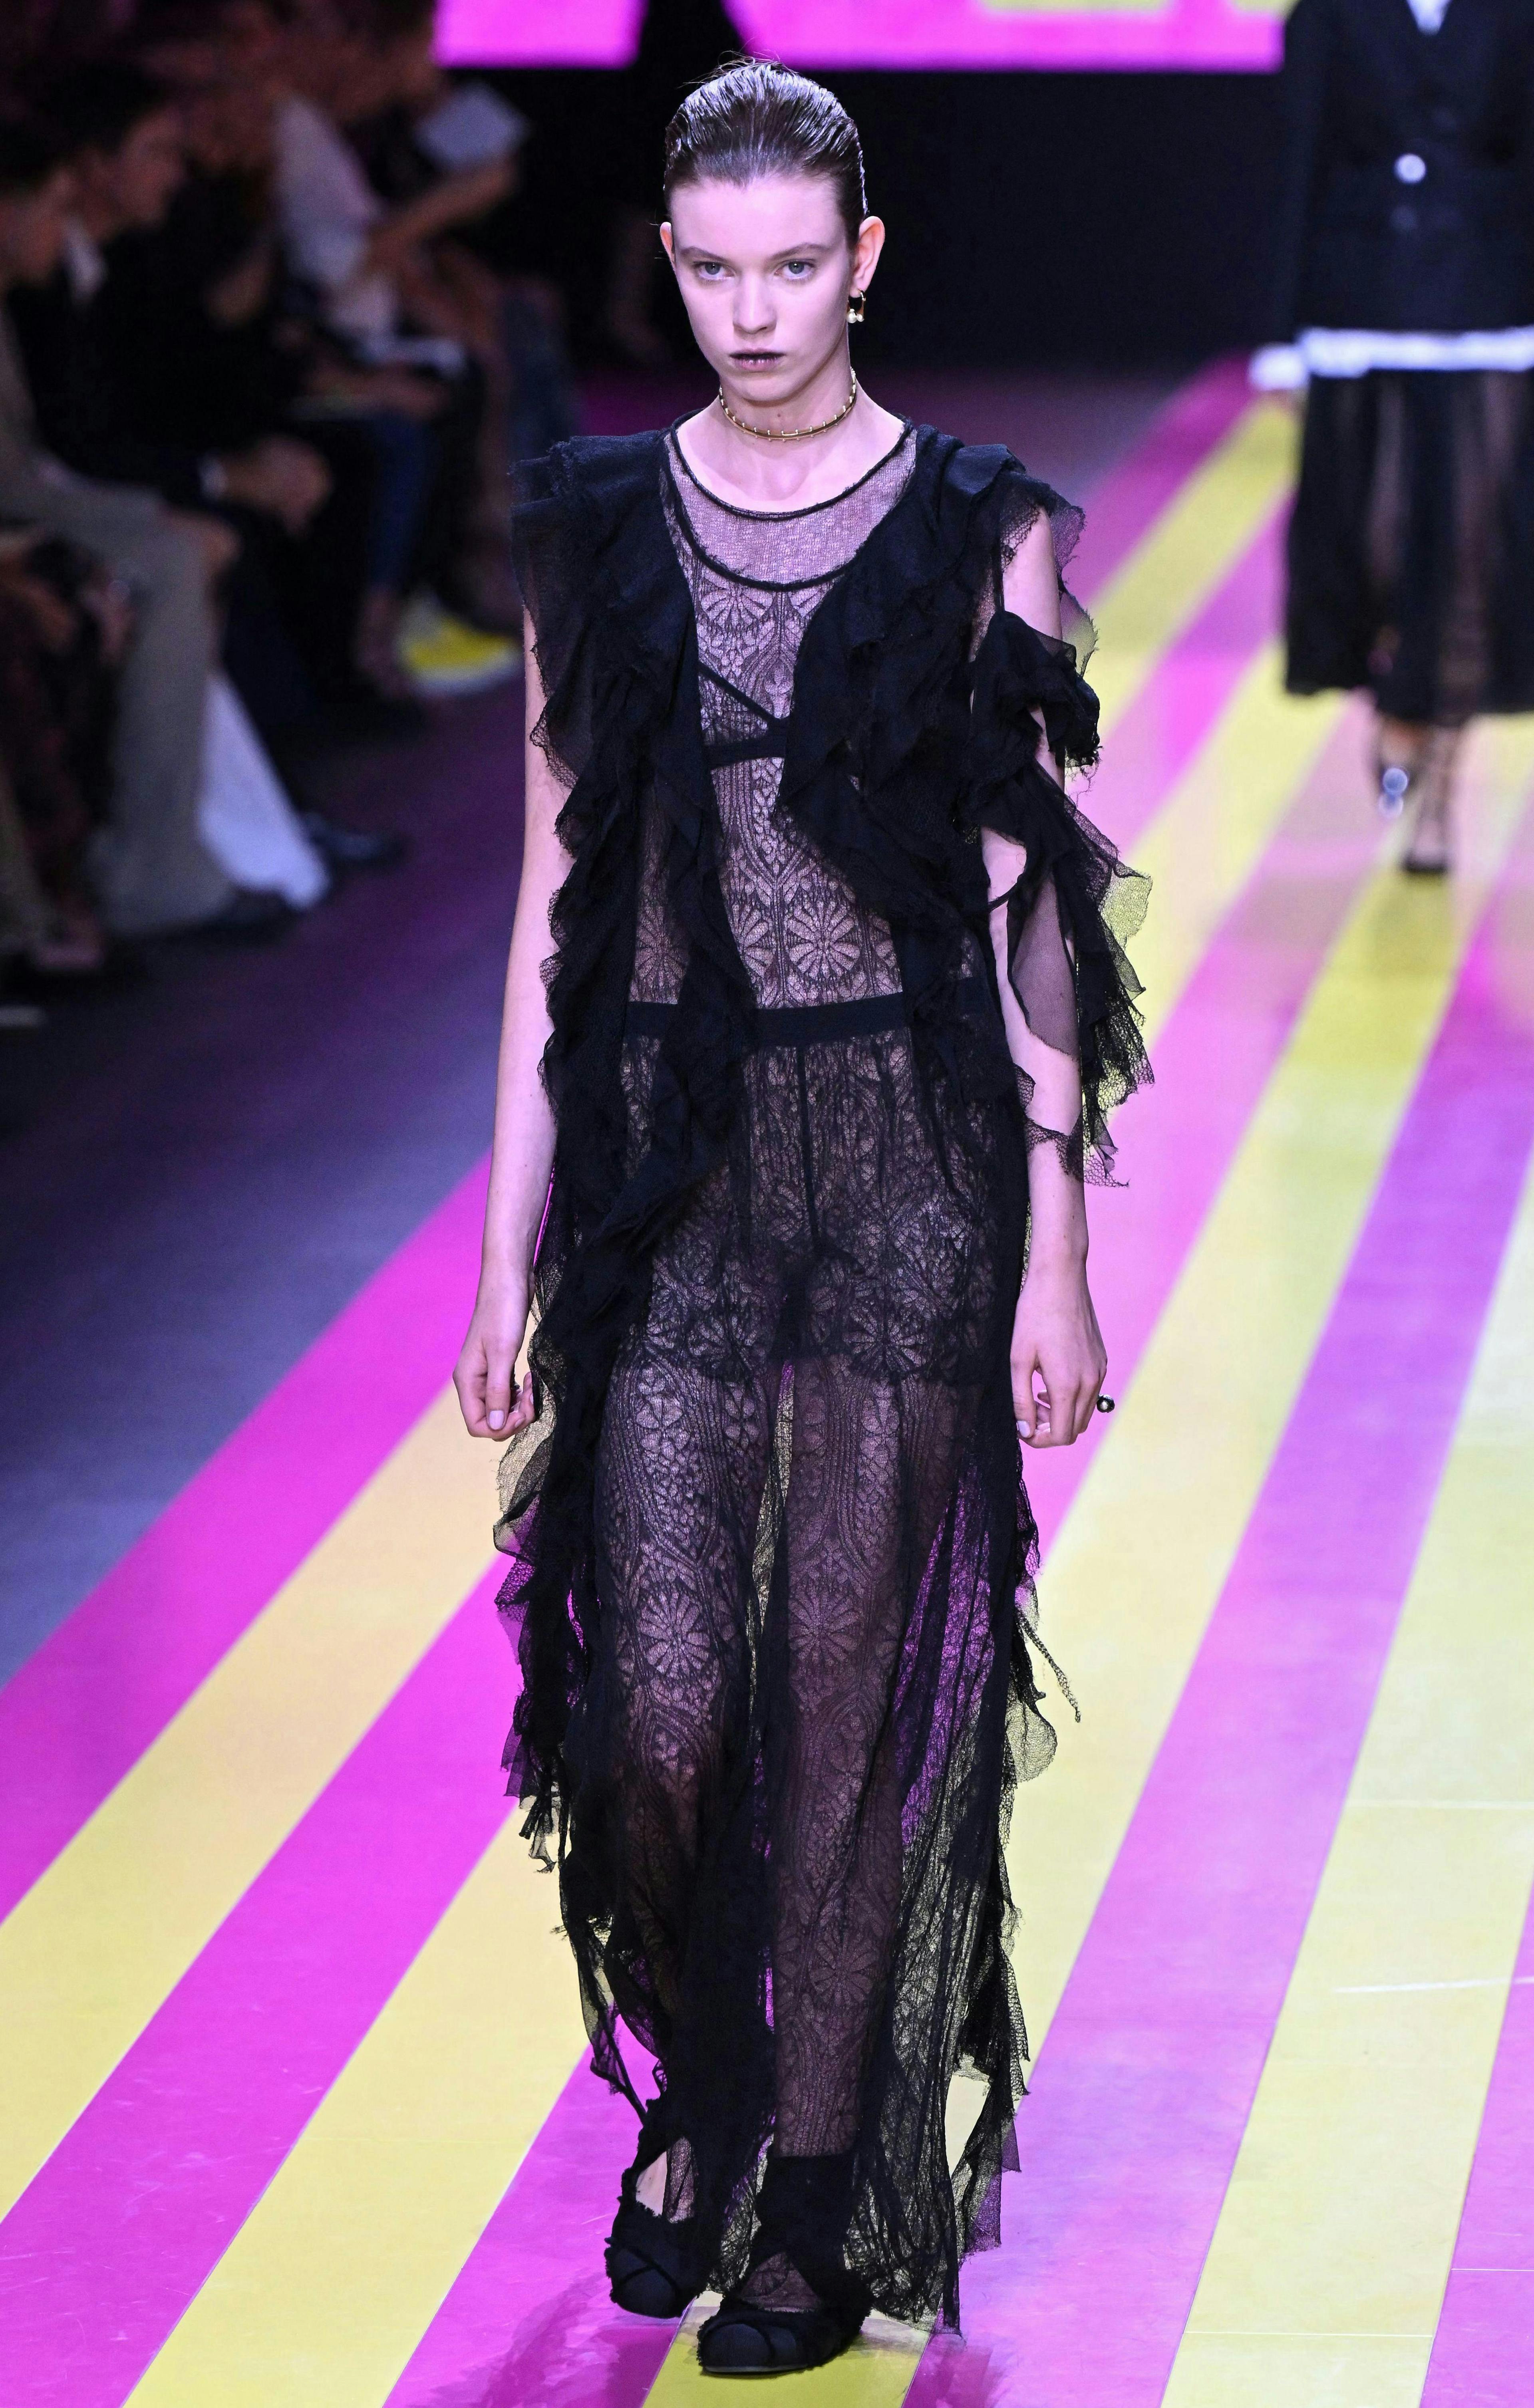 model in black lace dress with ruffled overlay